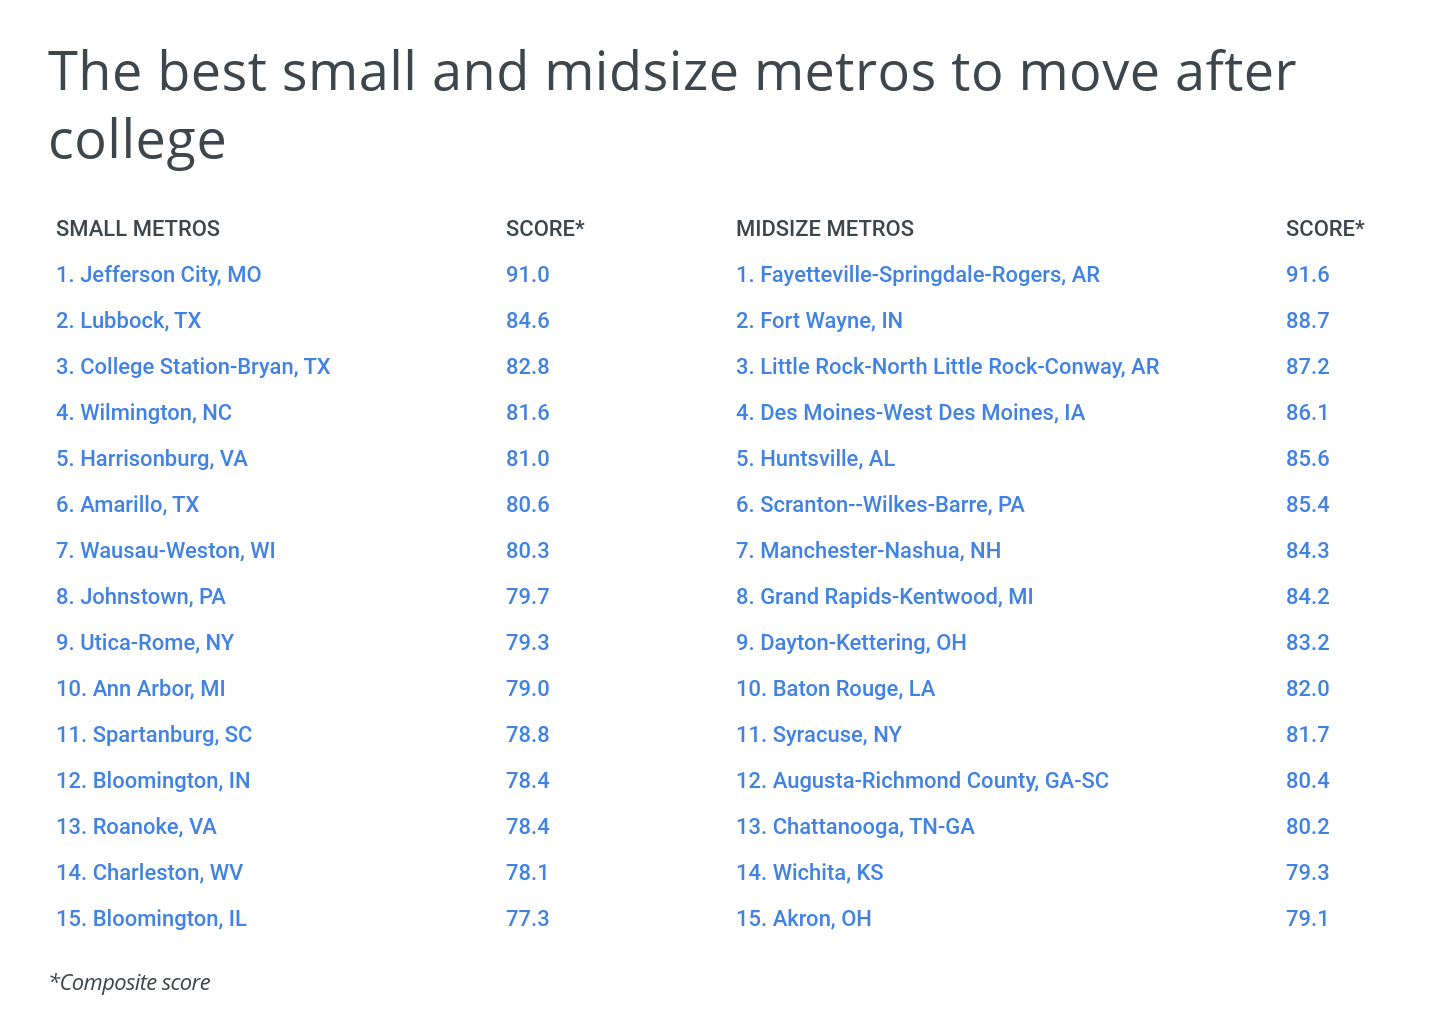 The best small and midsize metros to move after college